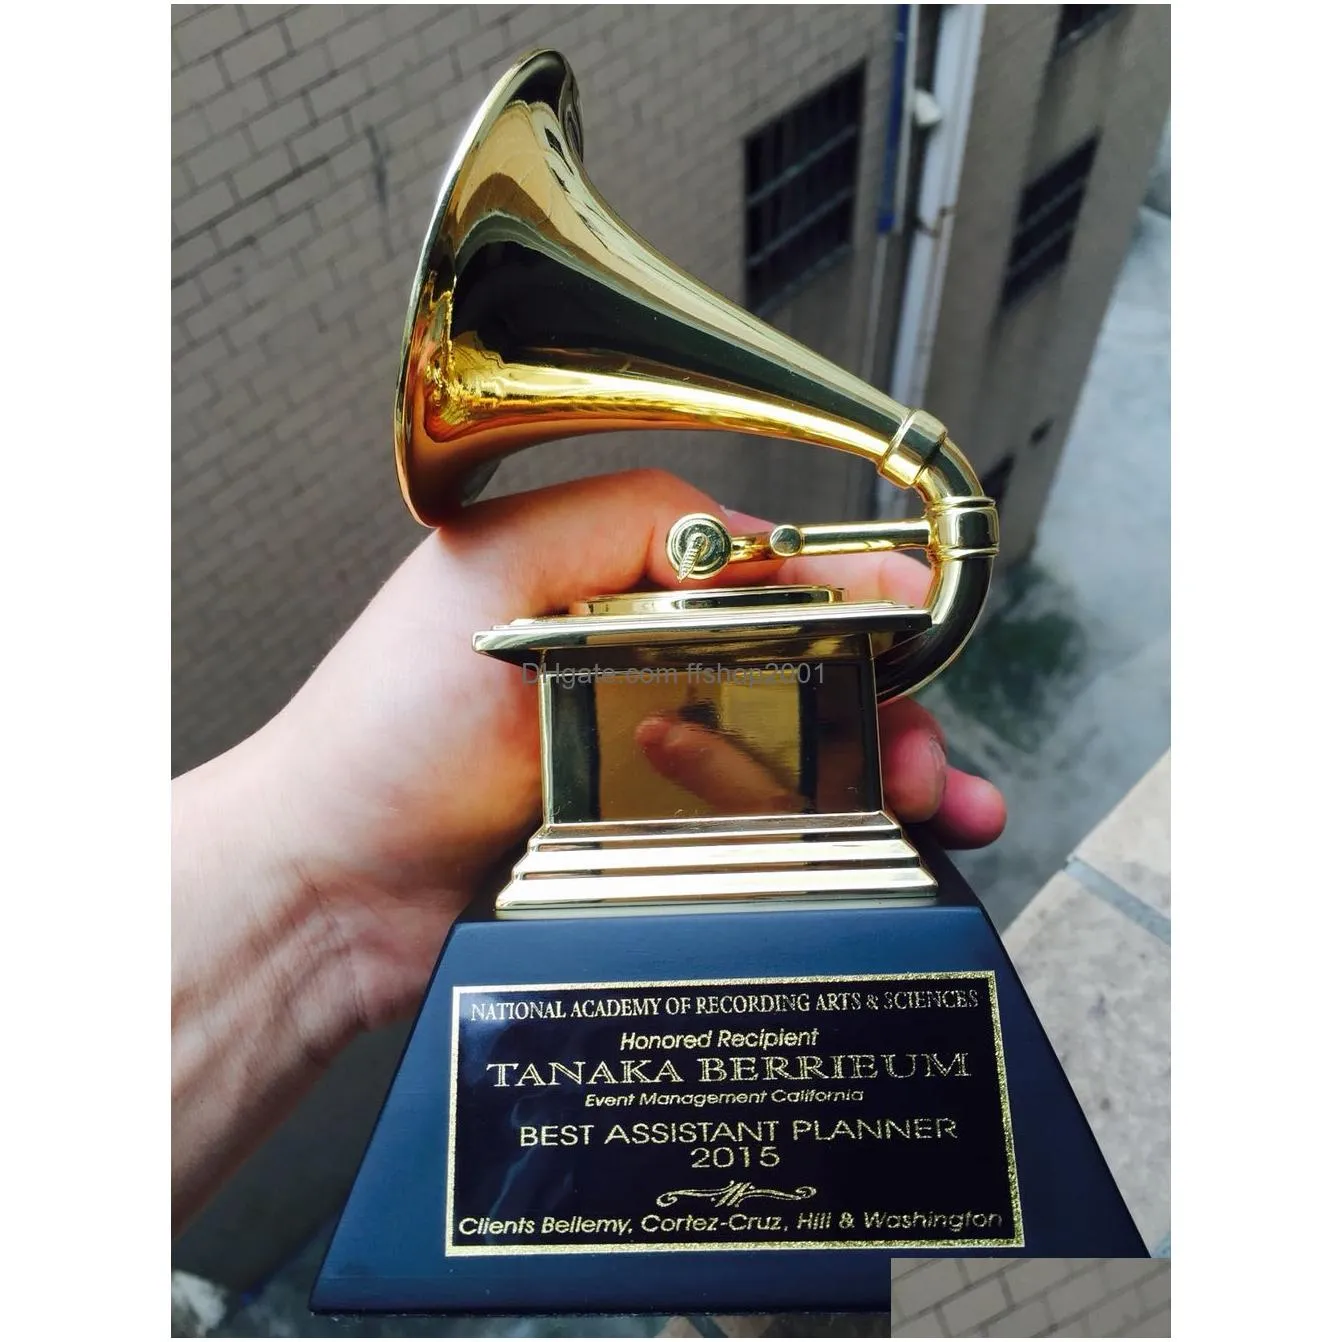 grammy award gramophone exquisite souvenir music trophy zinc alloy trophy nice gift award for the music competition shiping8767112